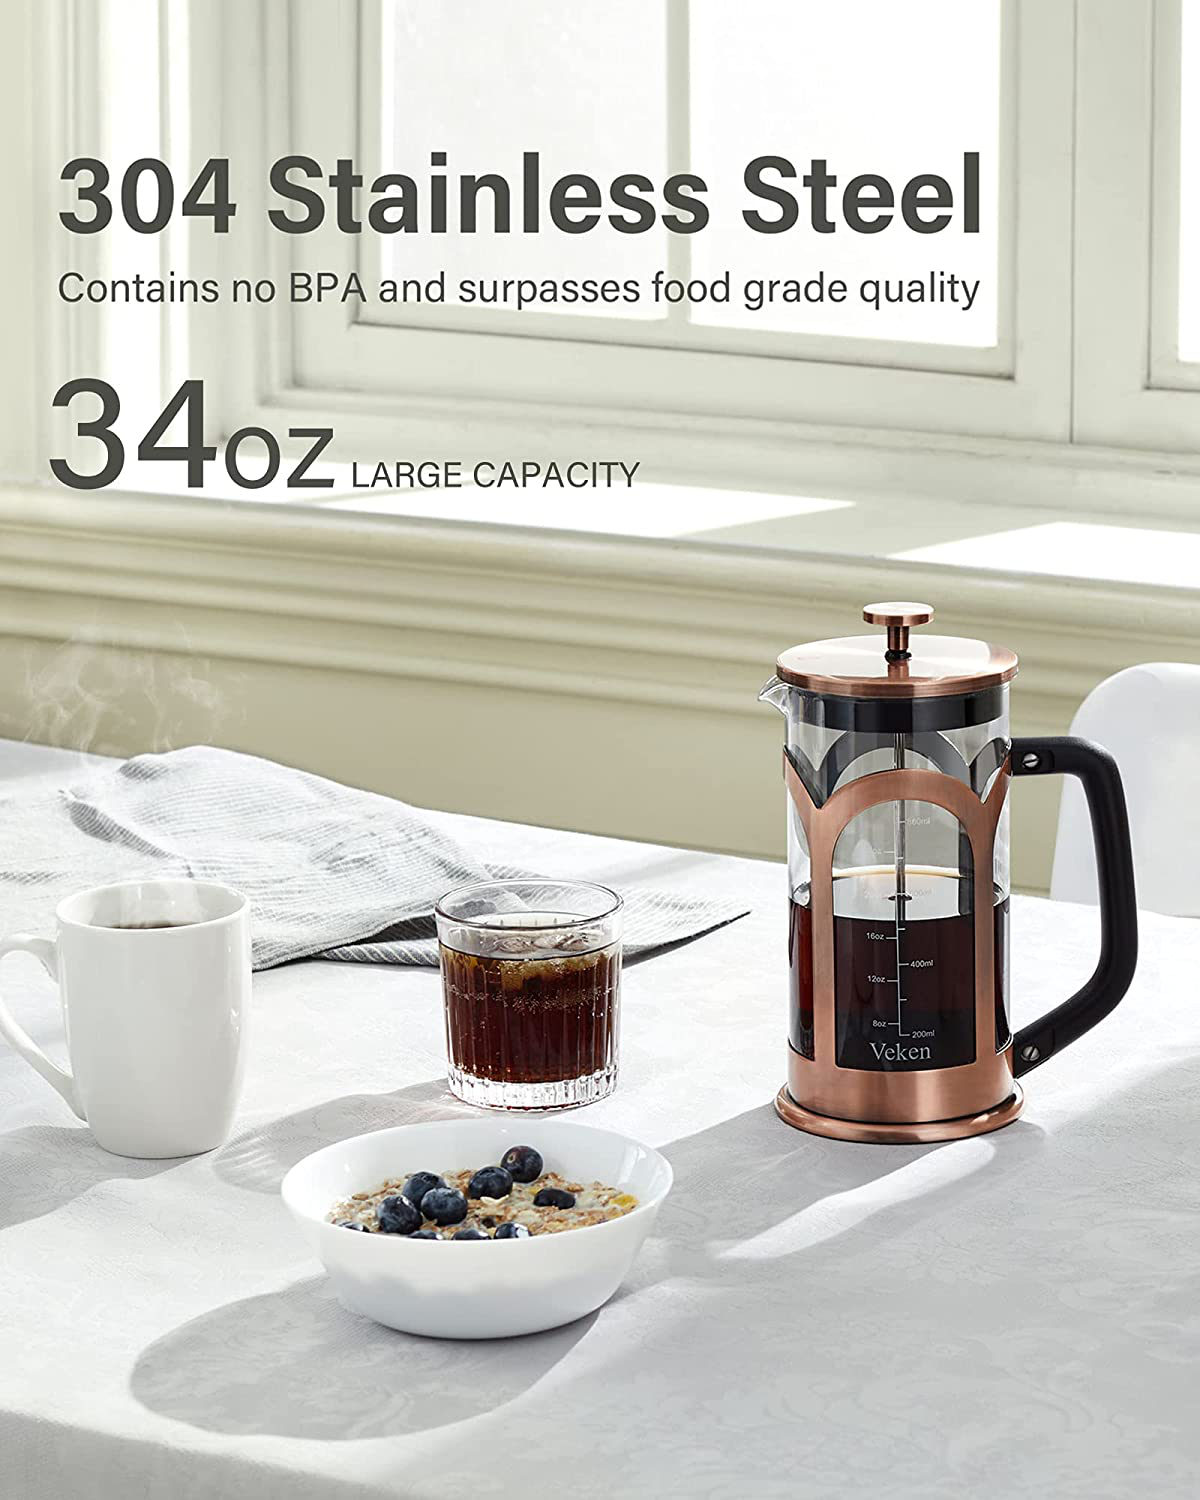 Veken French Press Coffee & Tea Maker, 304 Stainless Steel Heat Resistant Borosilicate Glass Coffee Press with 4 Filter Screens, Durable Easy Clean 100% BPA Free, 34oz, Grey